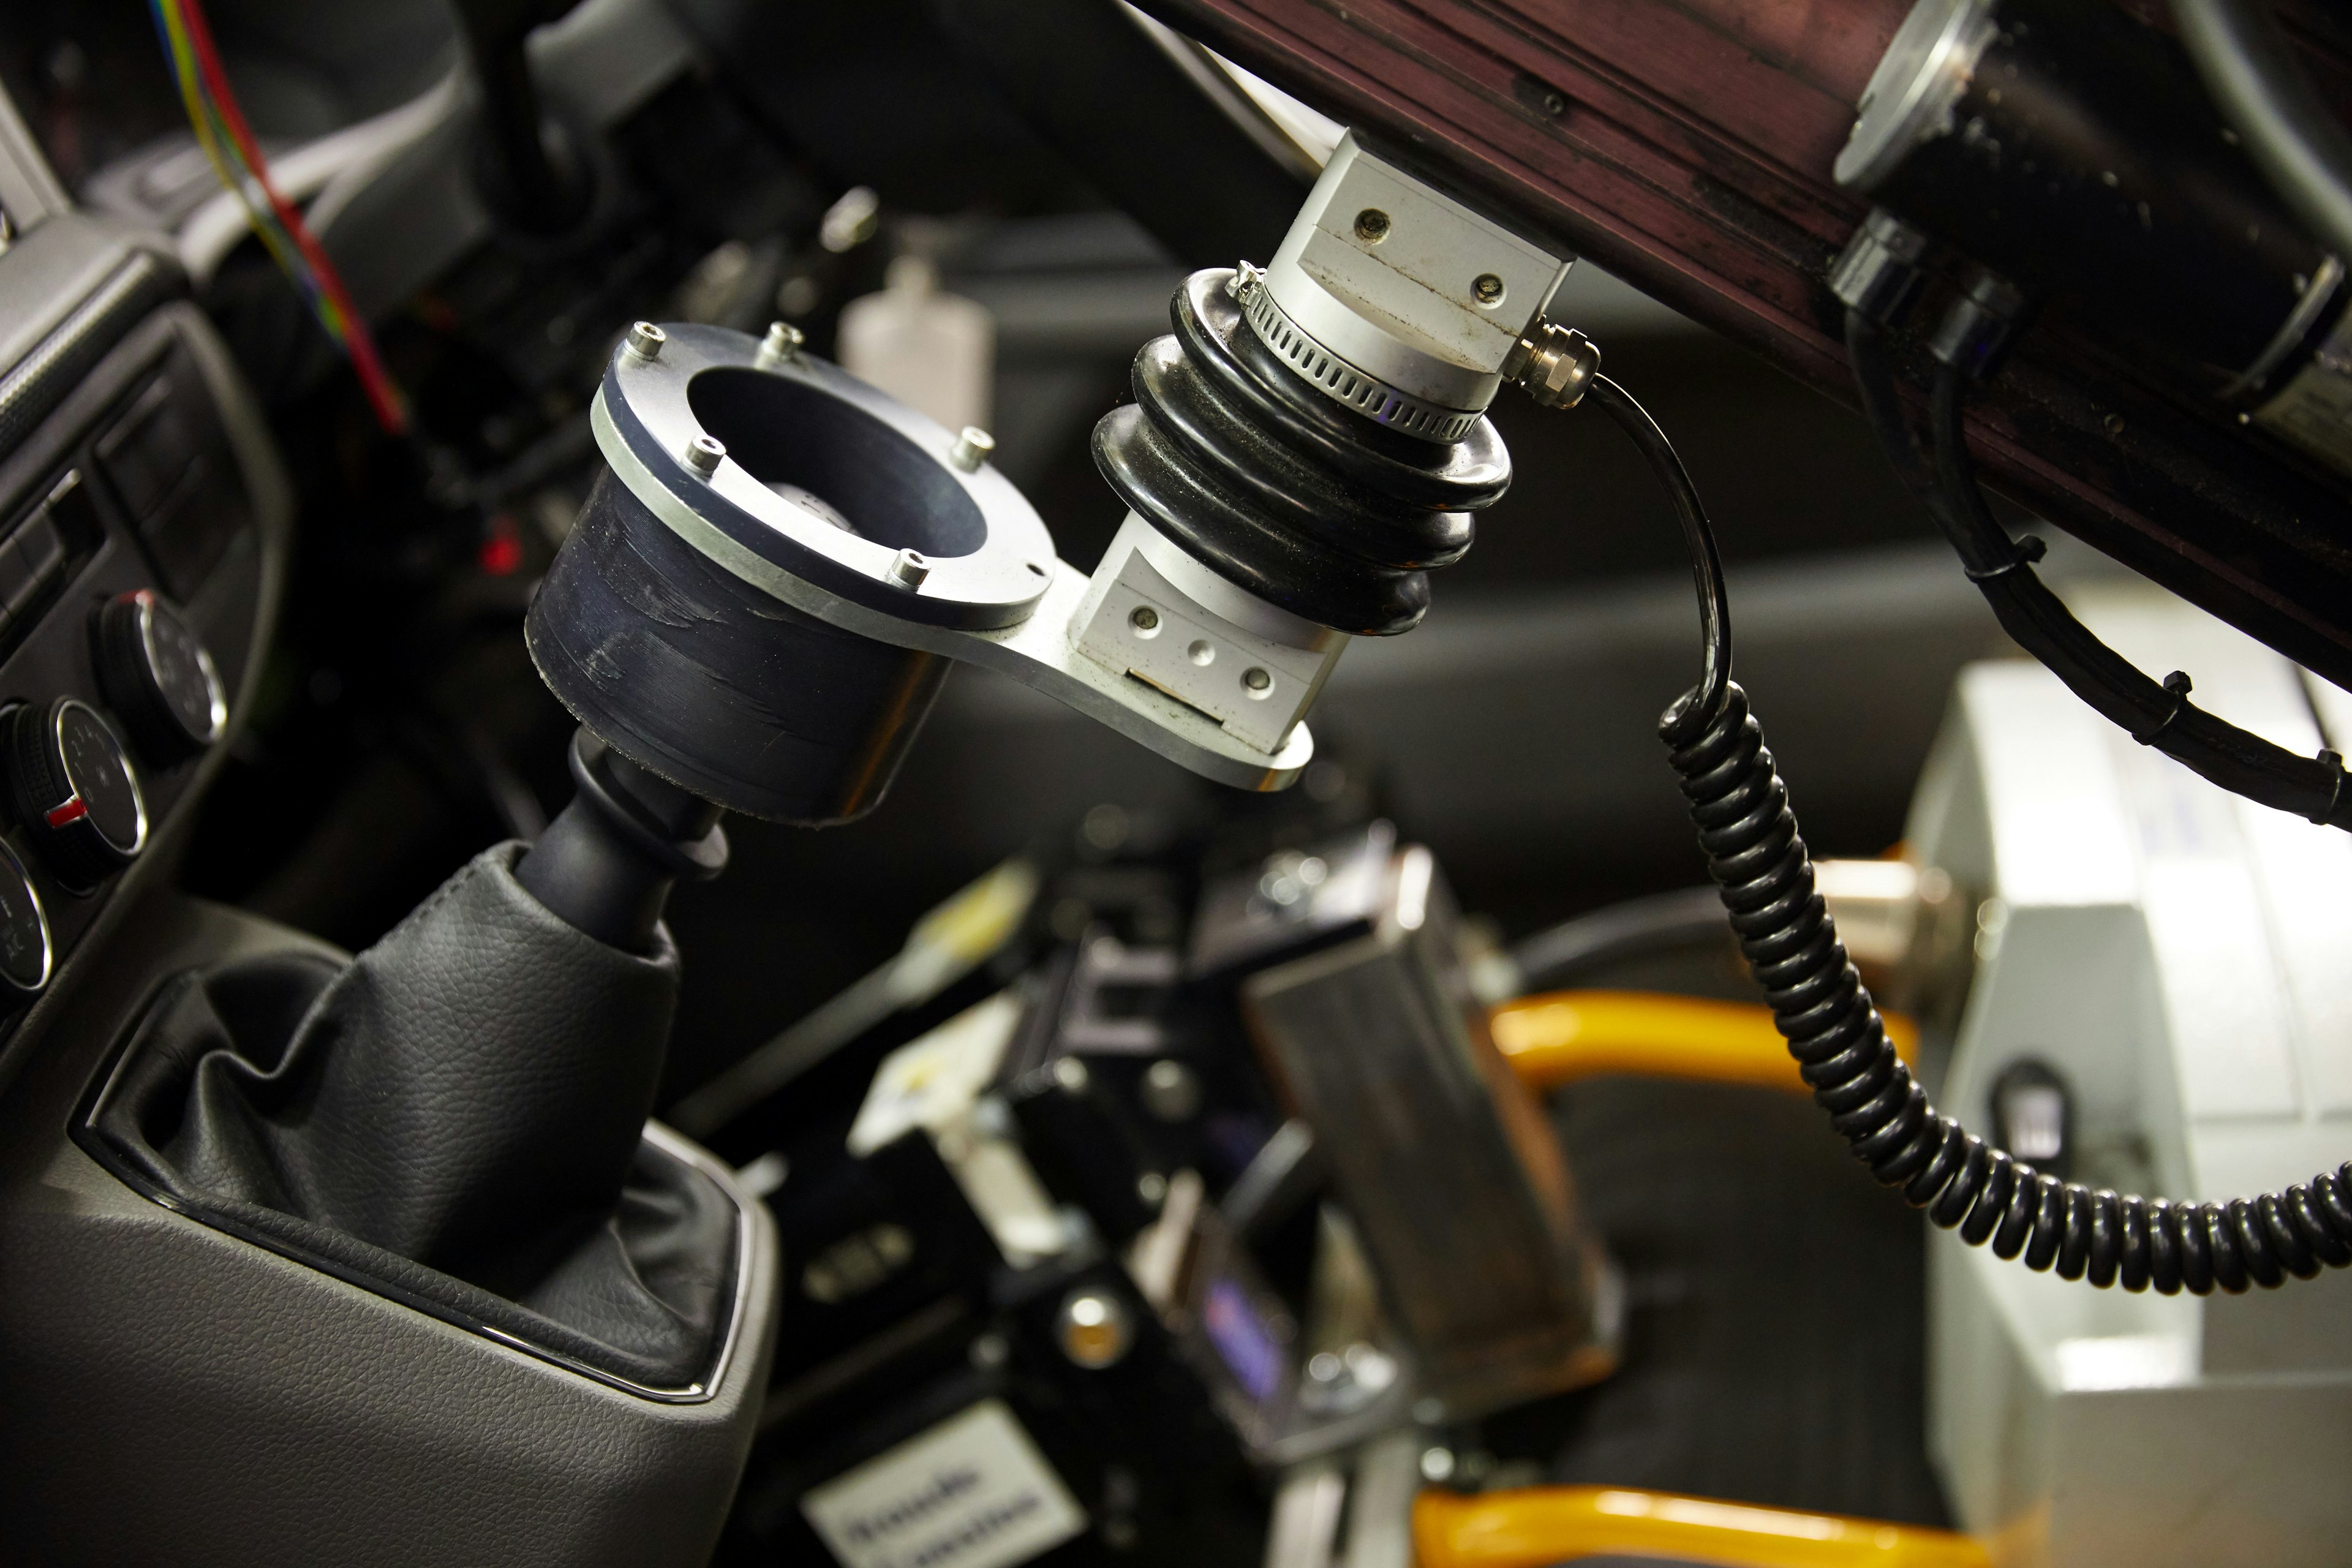 Robot driver attached to vehicle gear stick